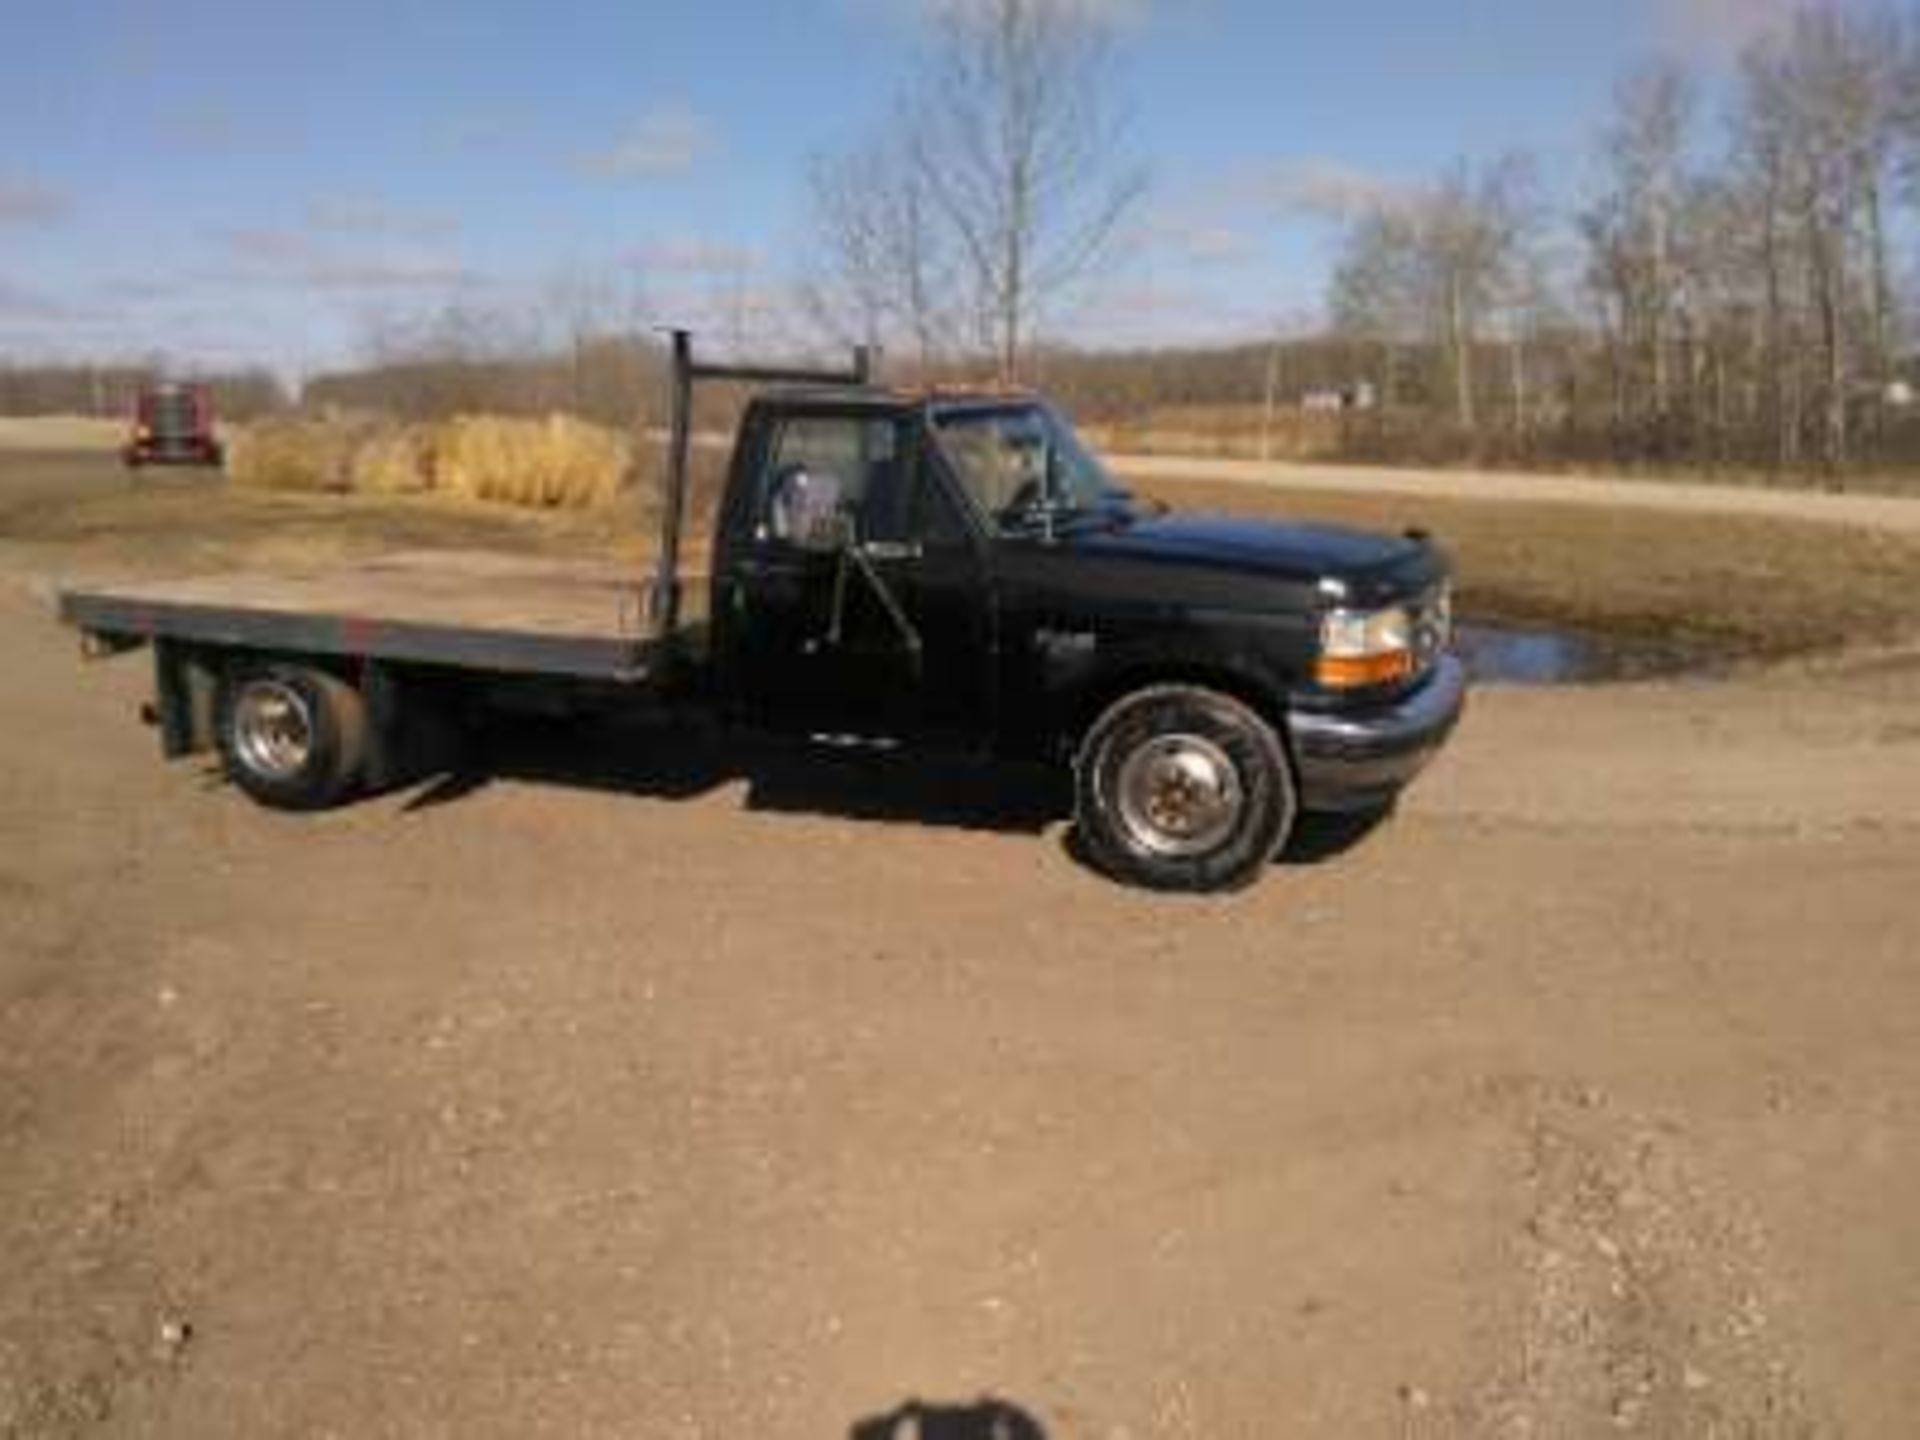 1994 F350 Turbo Dsl Truck w/flat deck, 238106kms (previously registered in Sask) - Image 2 of 5